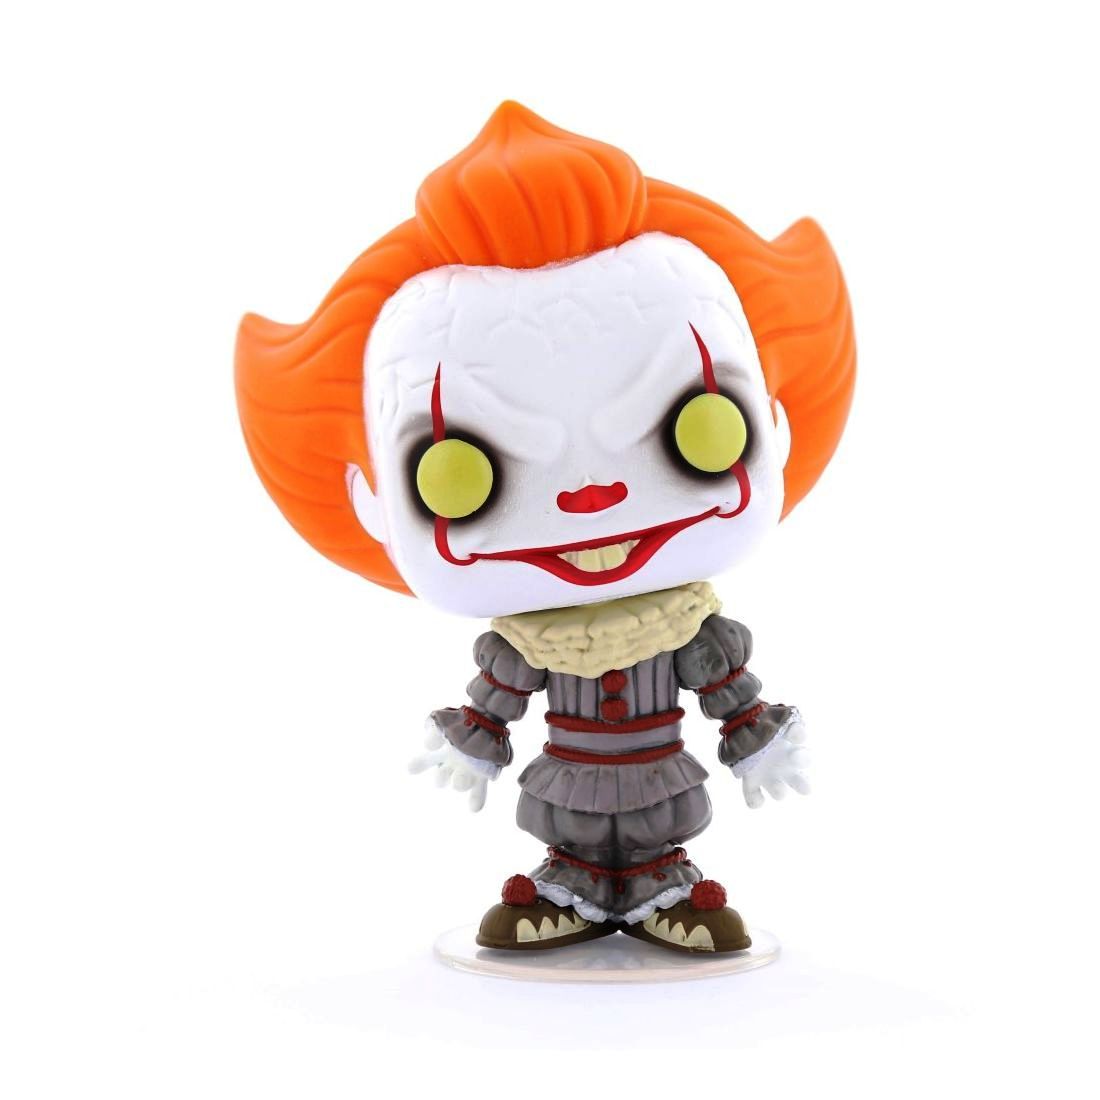 Funko Pop Movies It Chapter 2 Pennywise with Open Arms Vinyl Figure